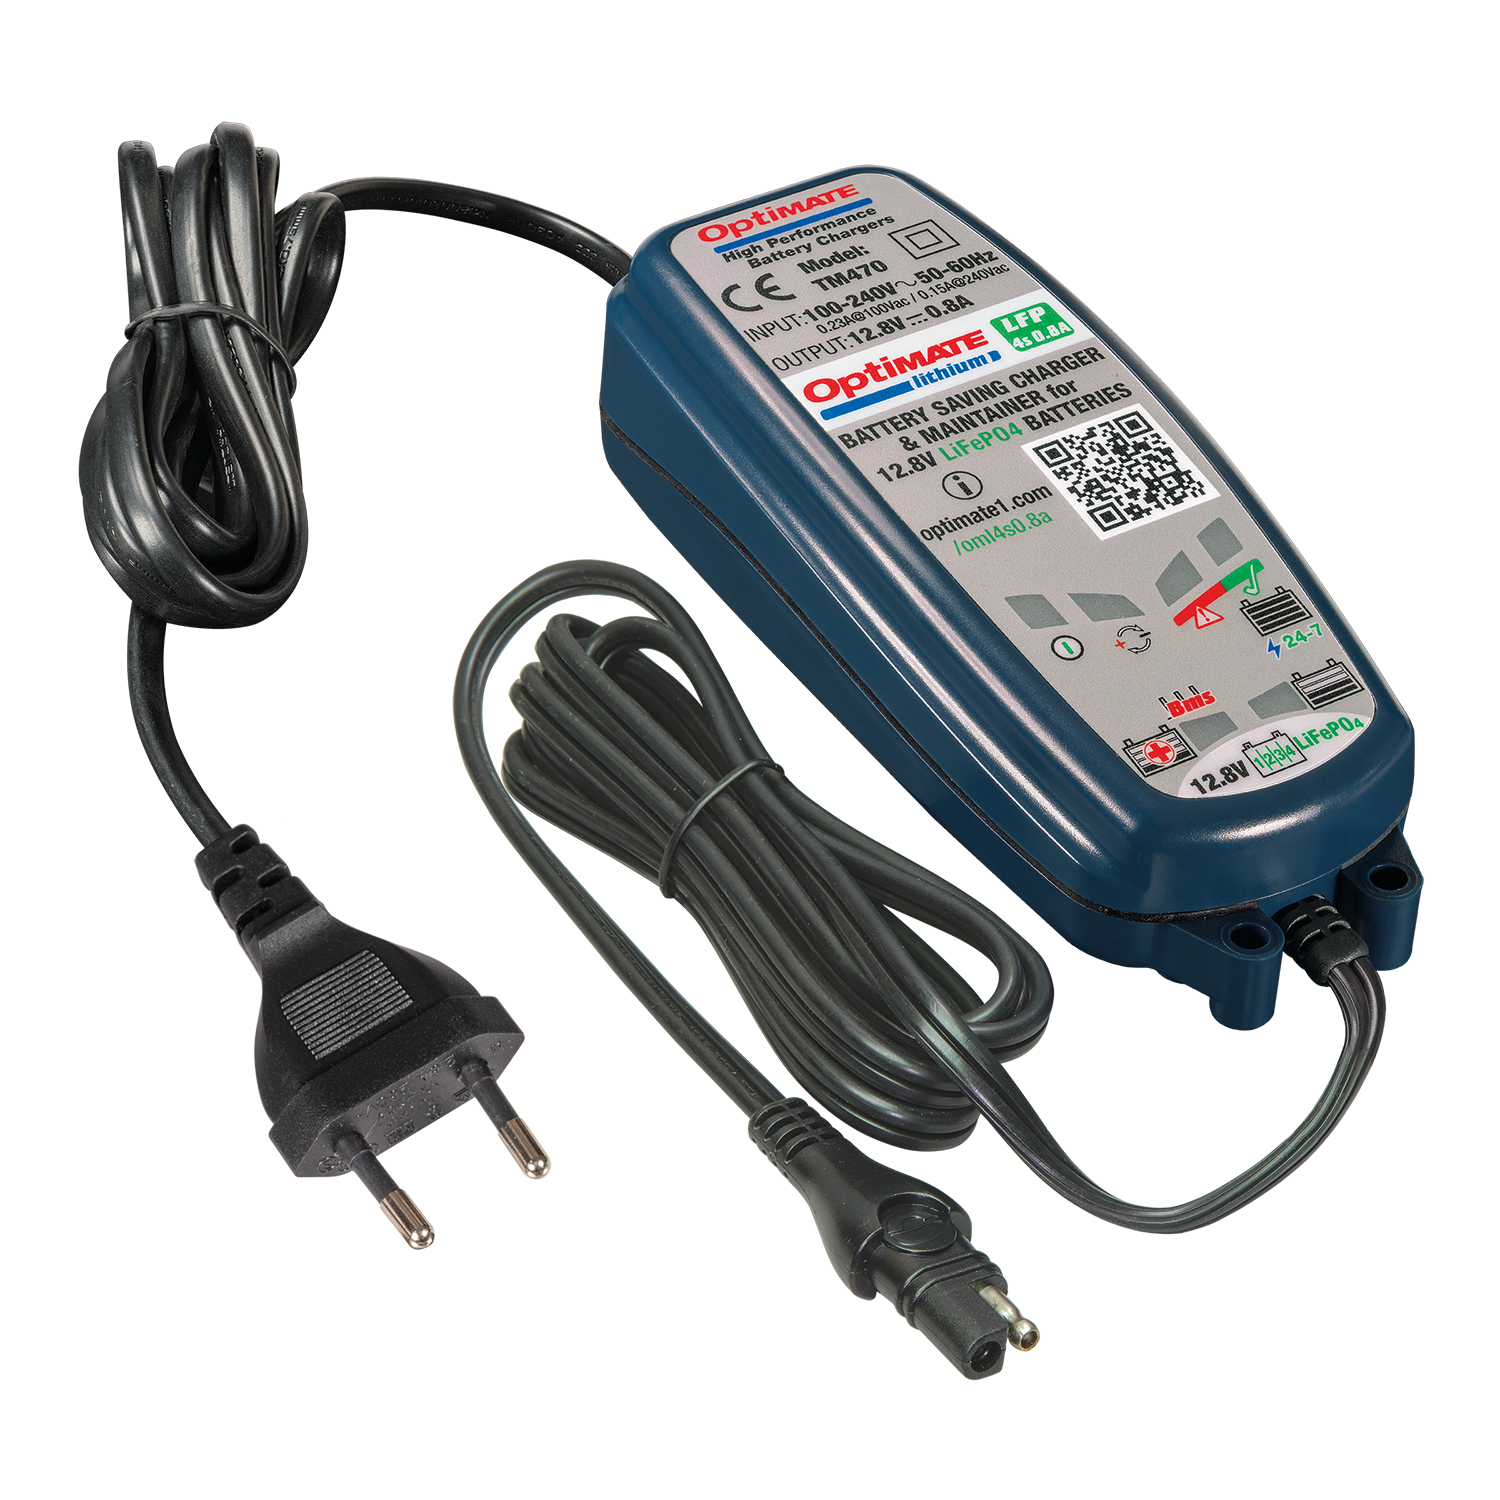 8-step 12.8/13.2V 0.8A Battery saving charger-tester-maintainer TM-471 Optimate Lithium 4s 0.8A